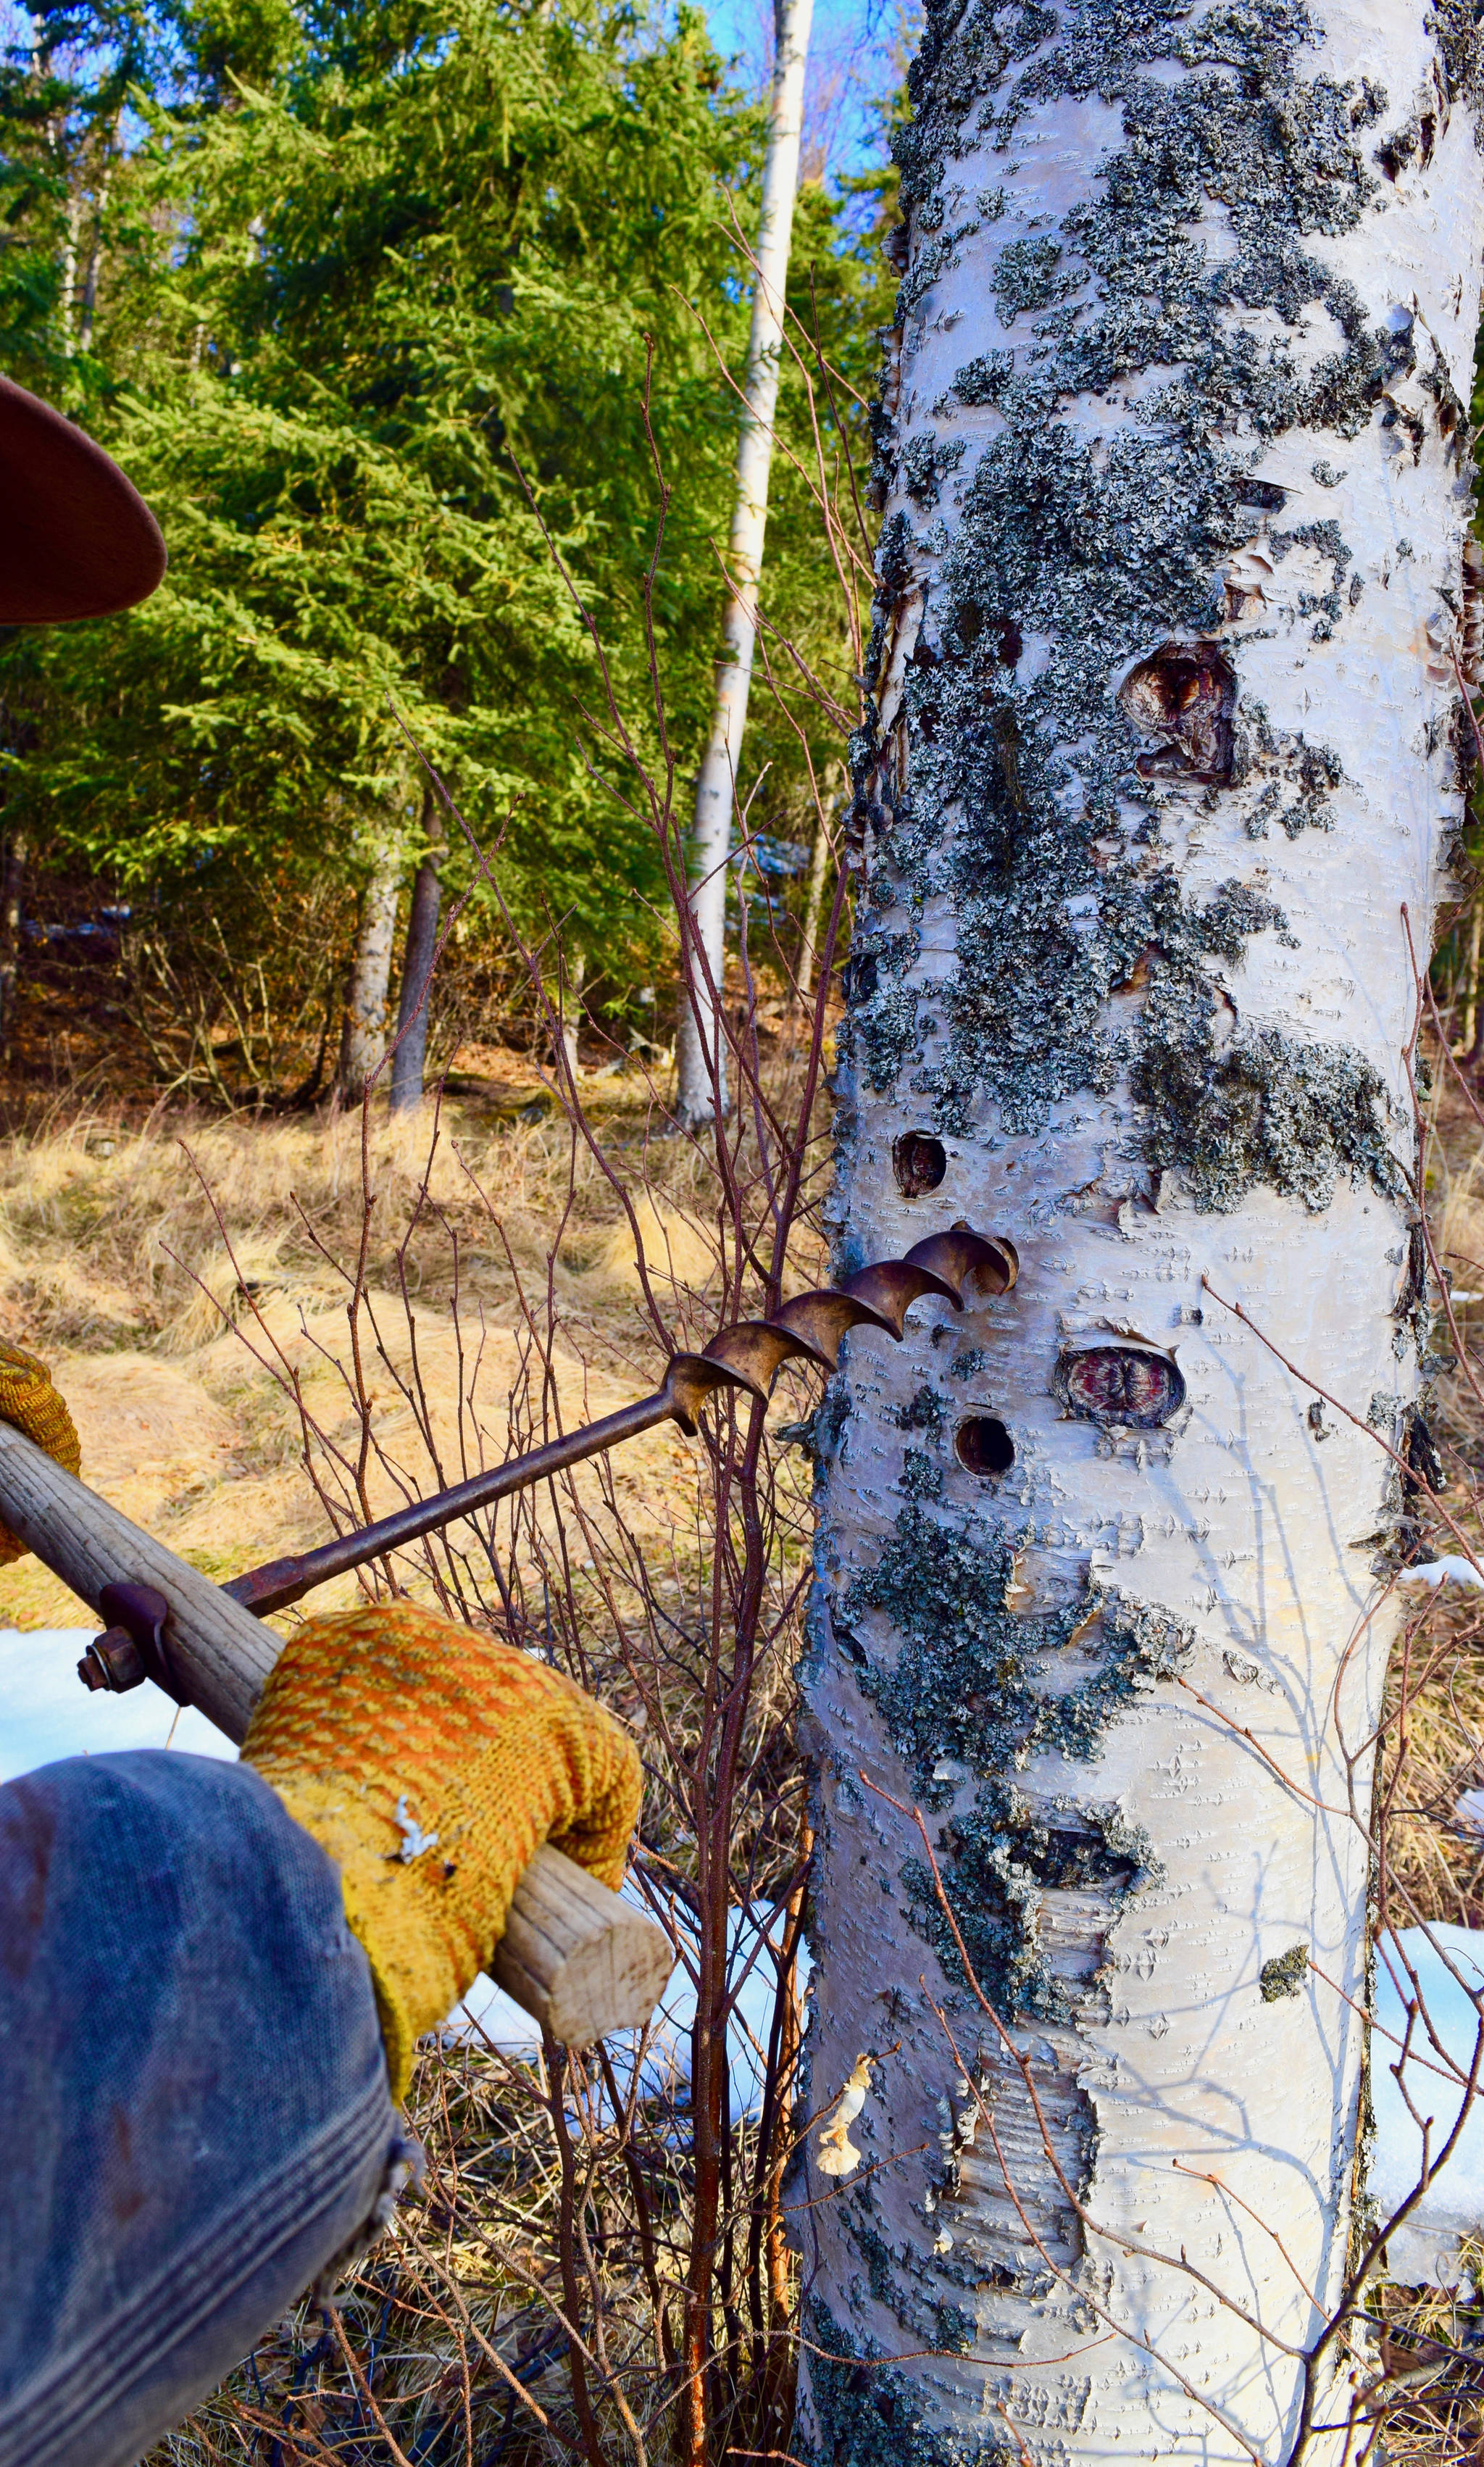 To start tapping birch sap, first a hole must be drilled into the tree. (Photo by Jennifer Tarnacki)